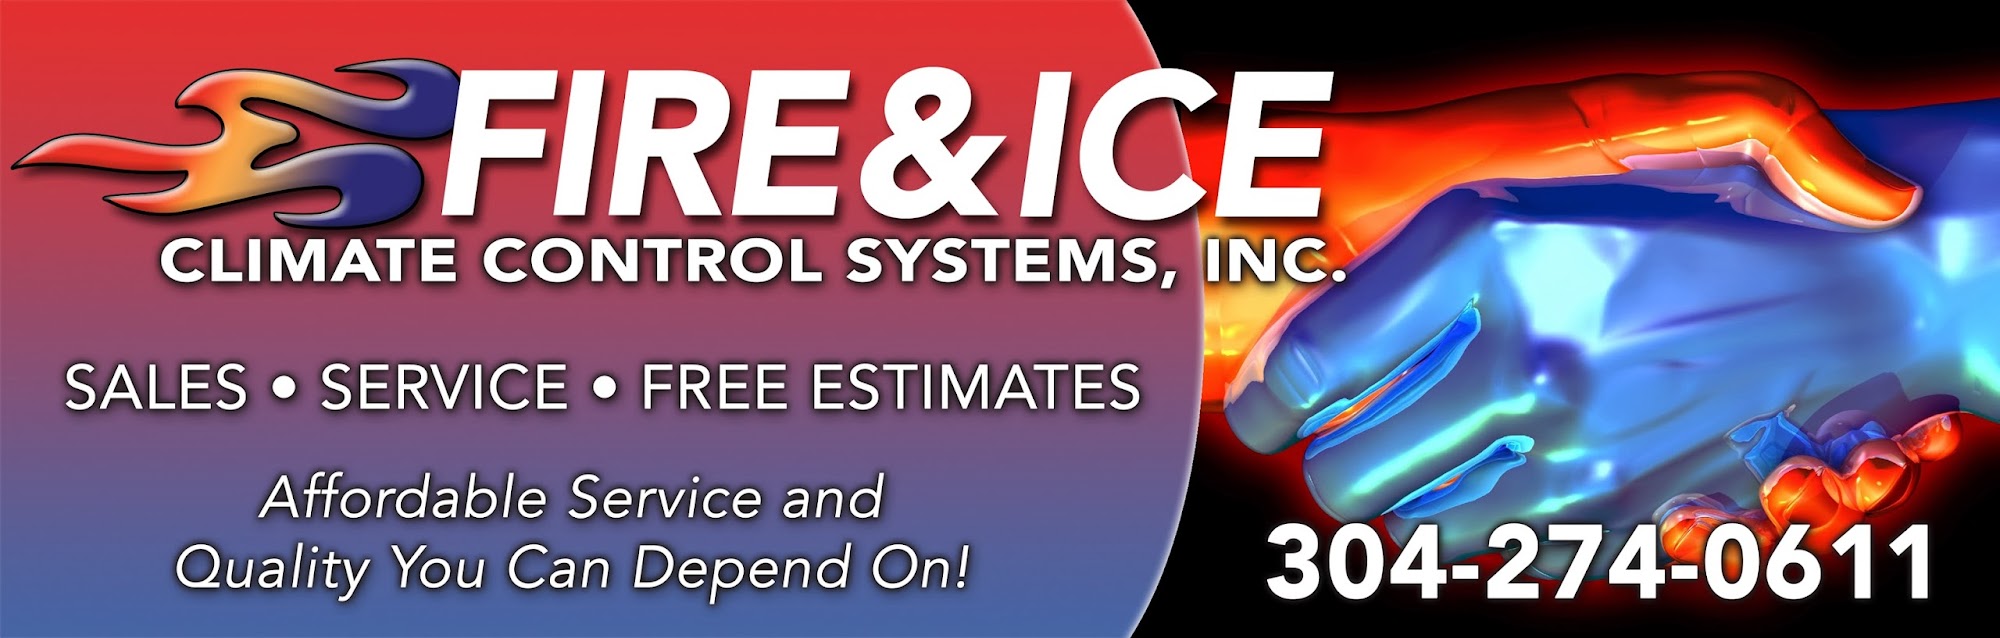 Fire & Ice Climate Control Systems, Inc.